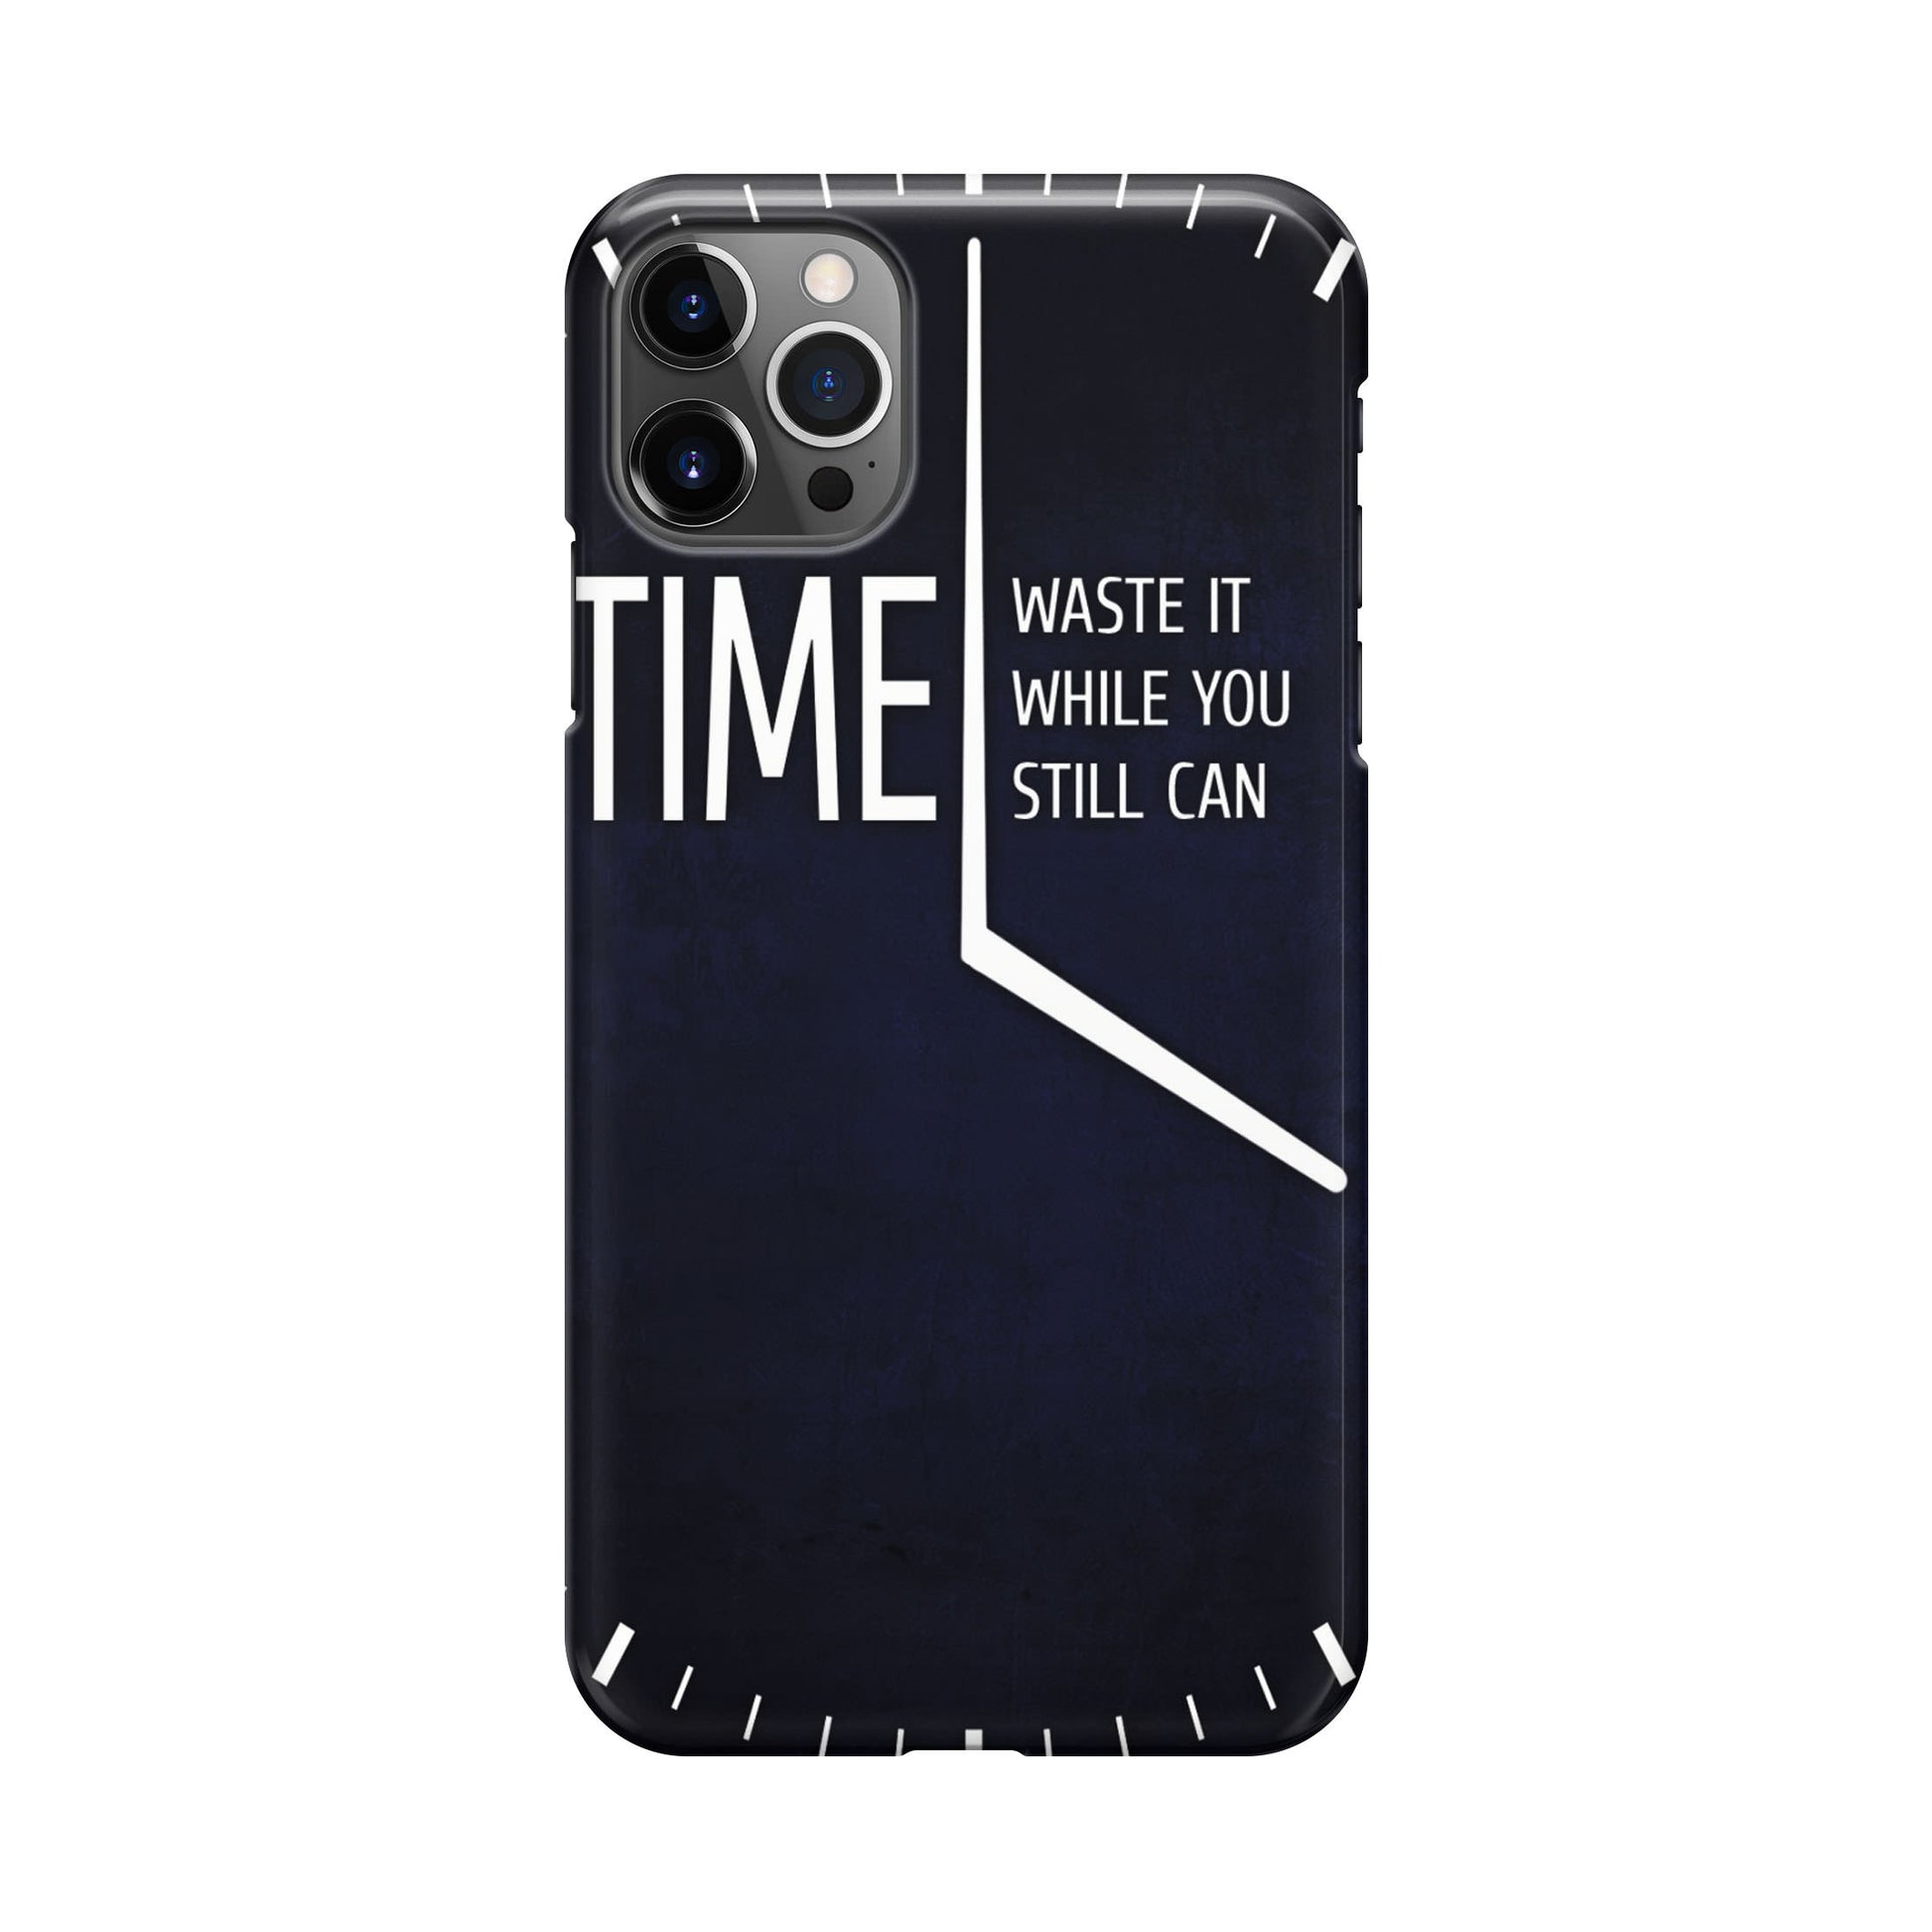 Time Waste It While You Still Can iPhone 12 Pro Max Case